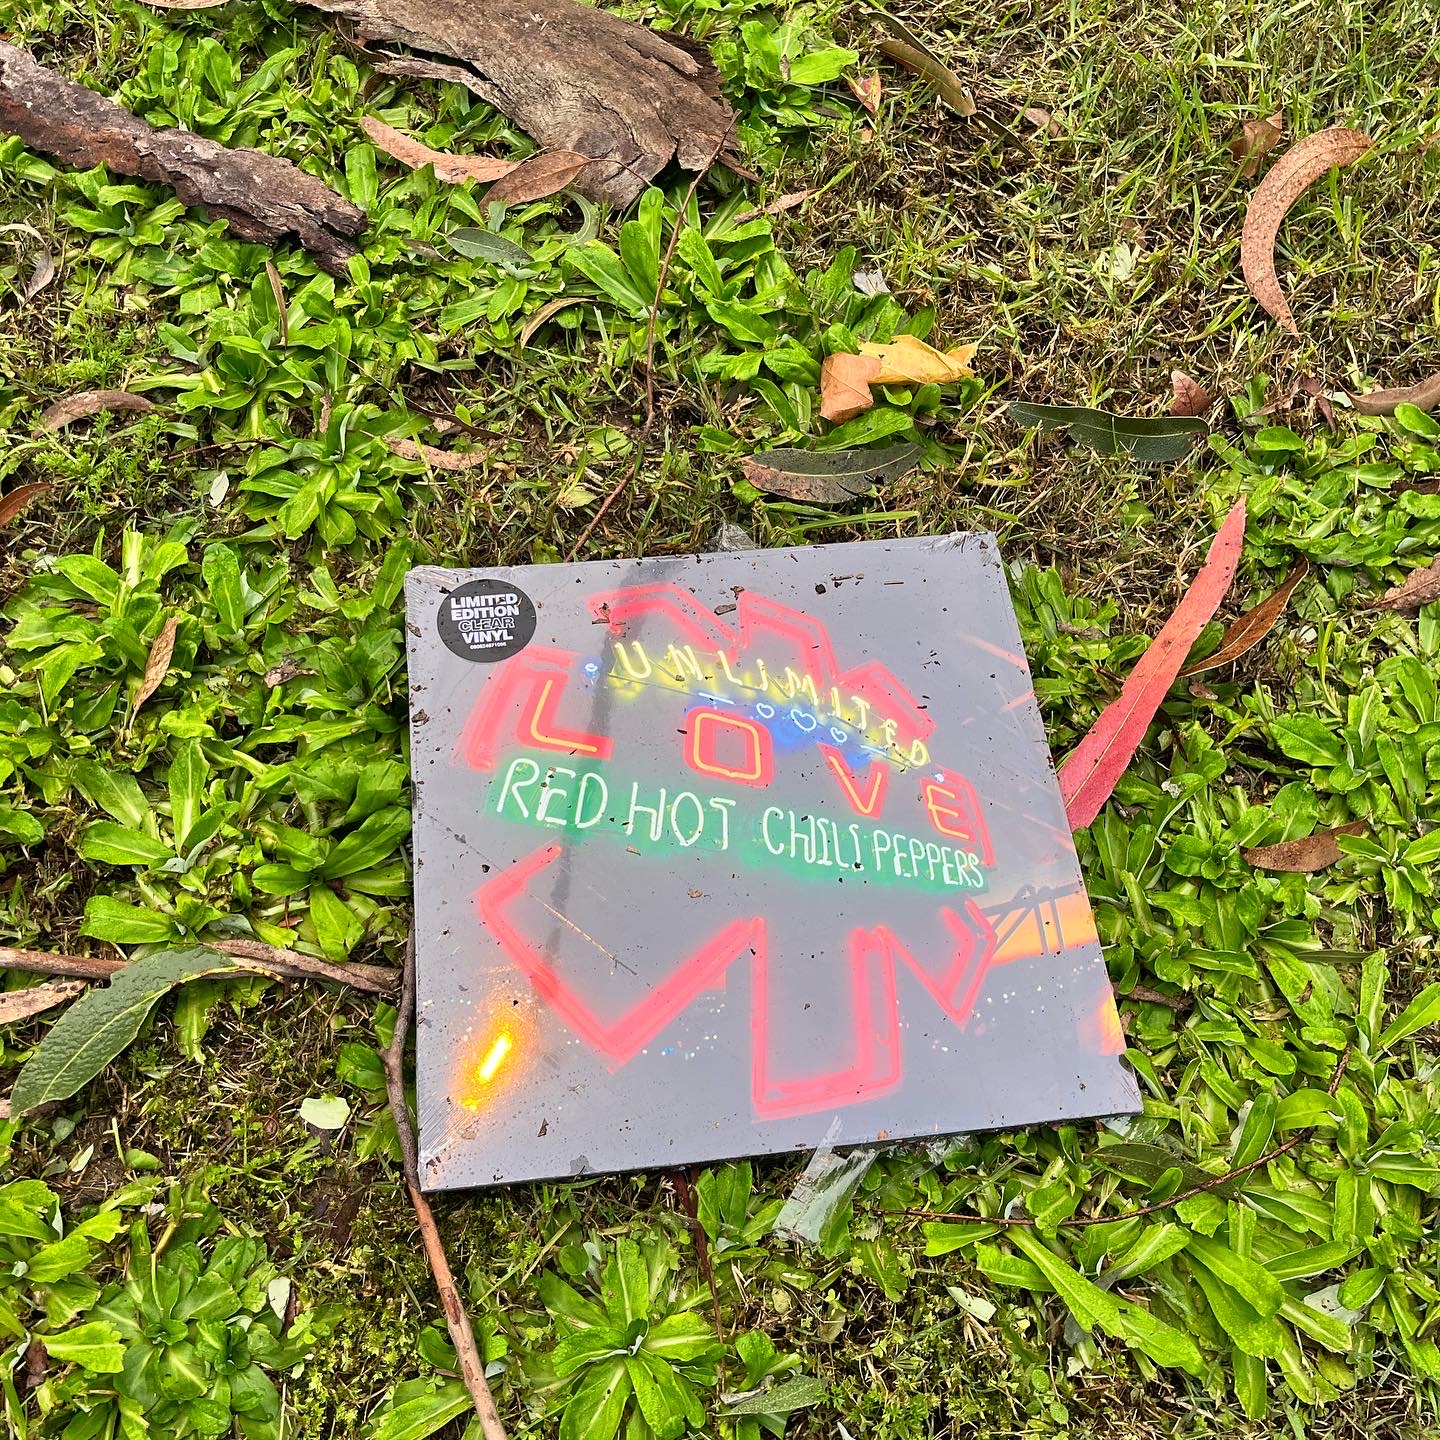 Photo of a vinyl album with the Red Hot Chili Peppers' name and logo, and the album title UNLIMITED LOVE in lurid neon, lying on damp green grass